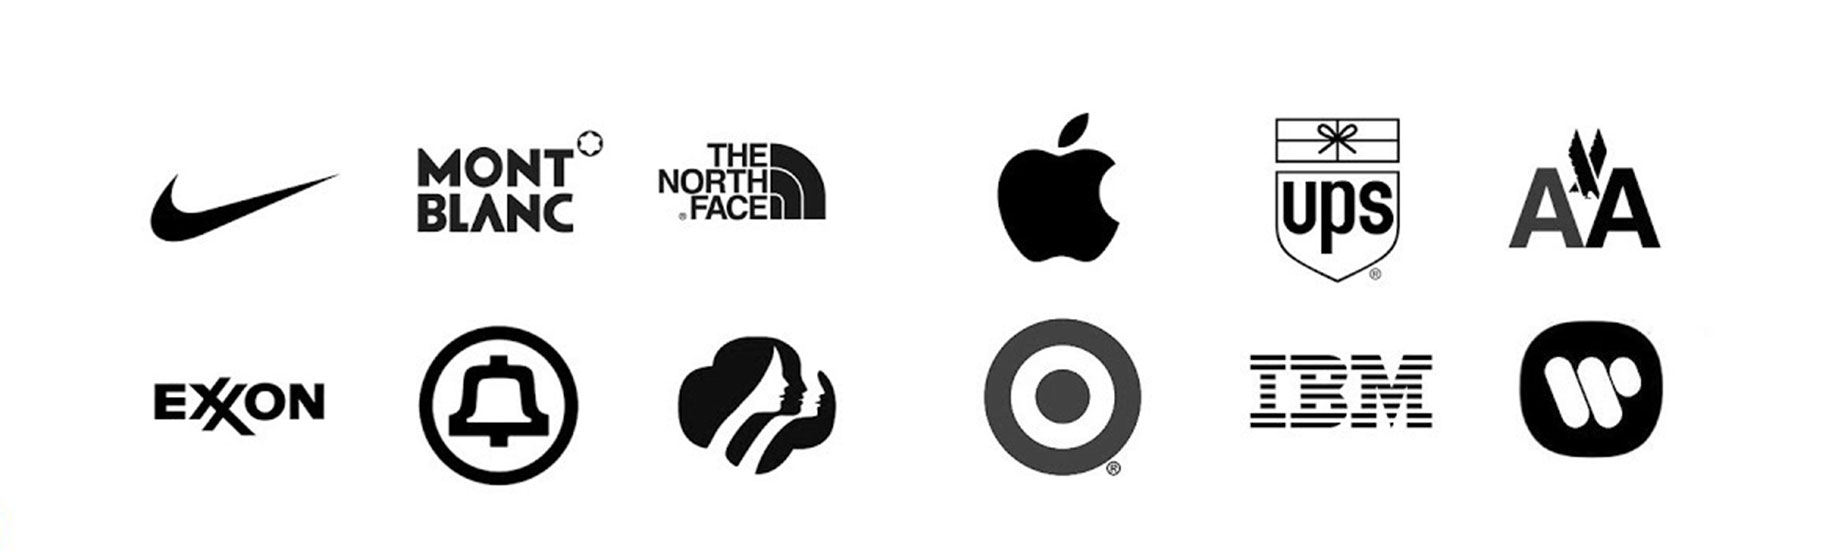 The process of creating a quality logo - the most important characteristics and elements